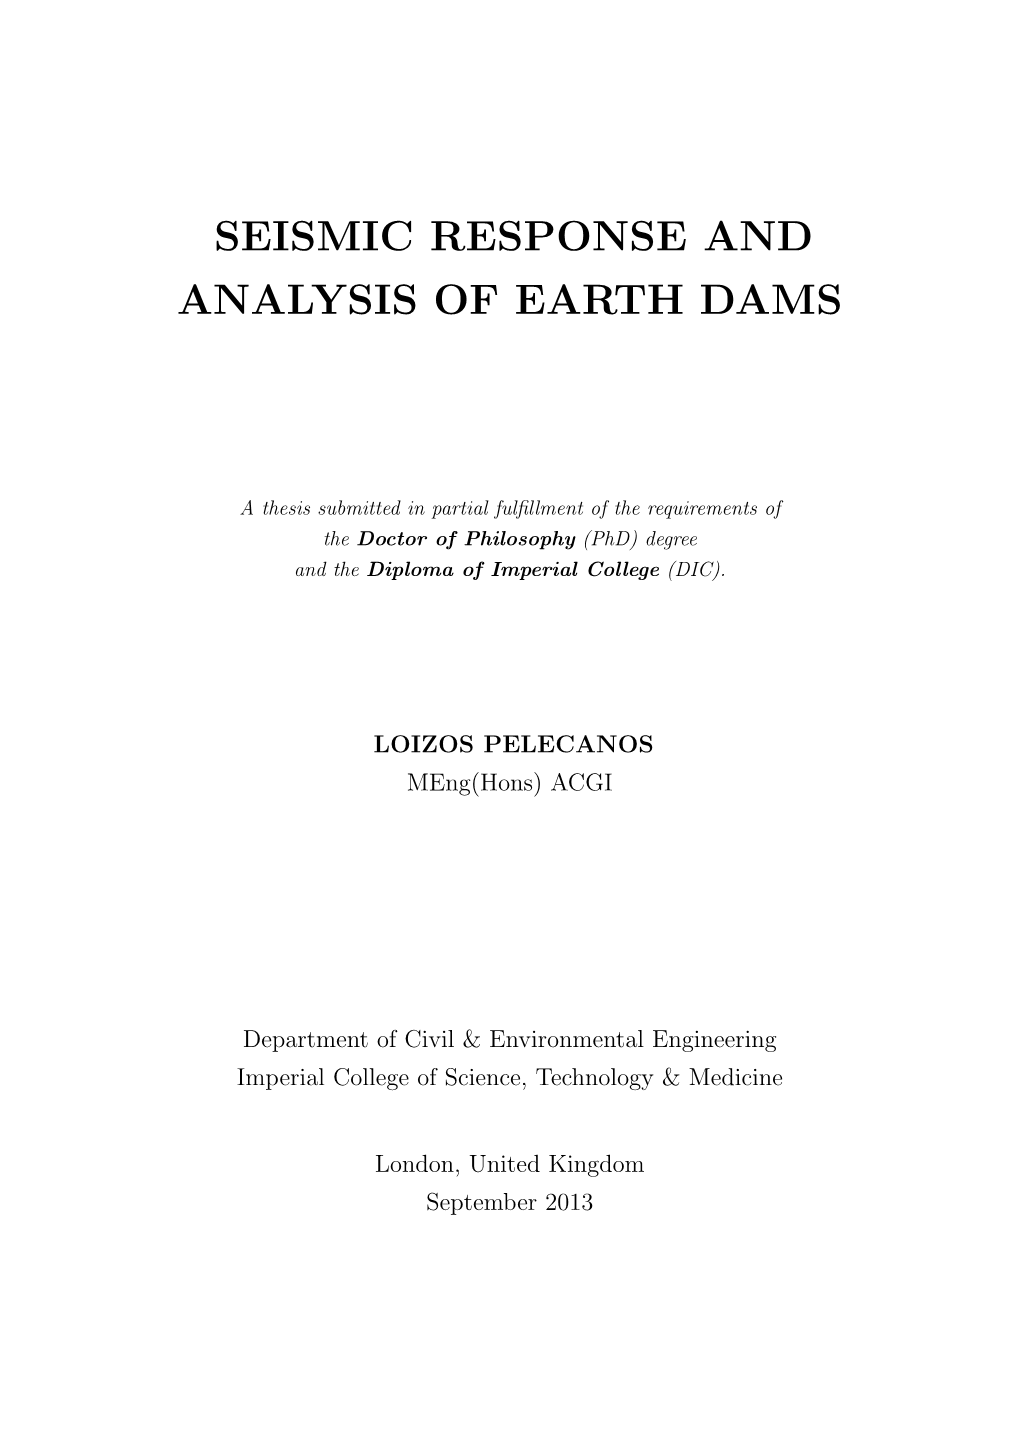 Seismic Response and Analysis of Earth Dams